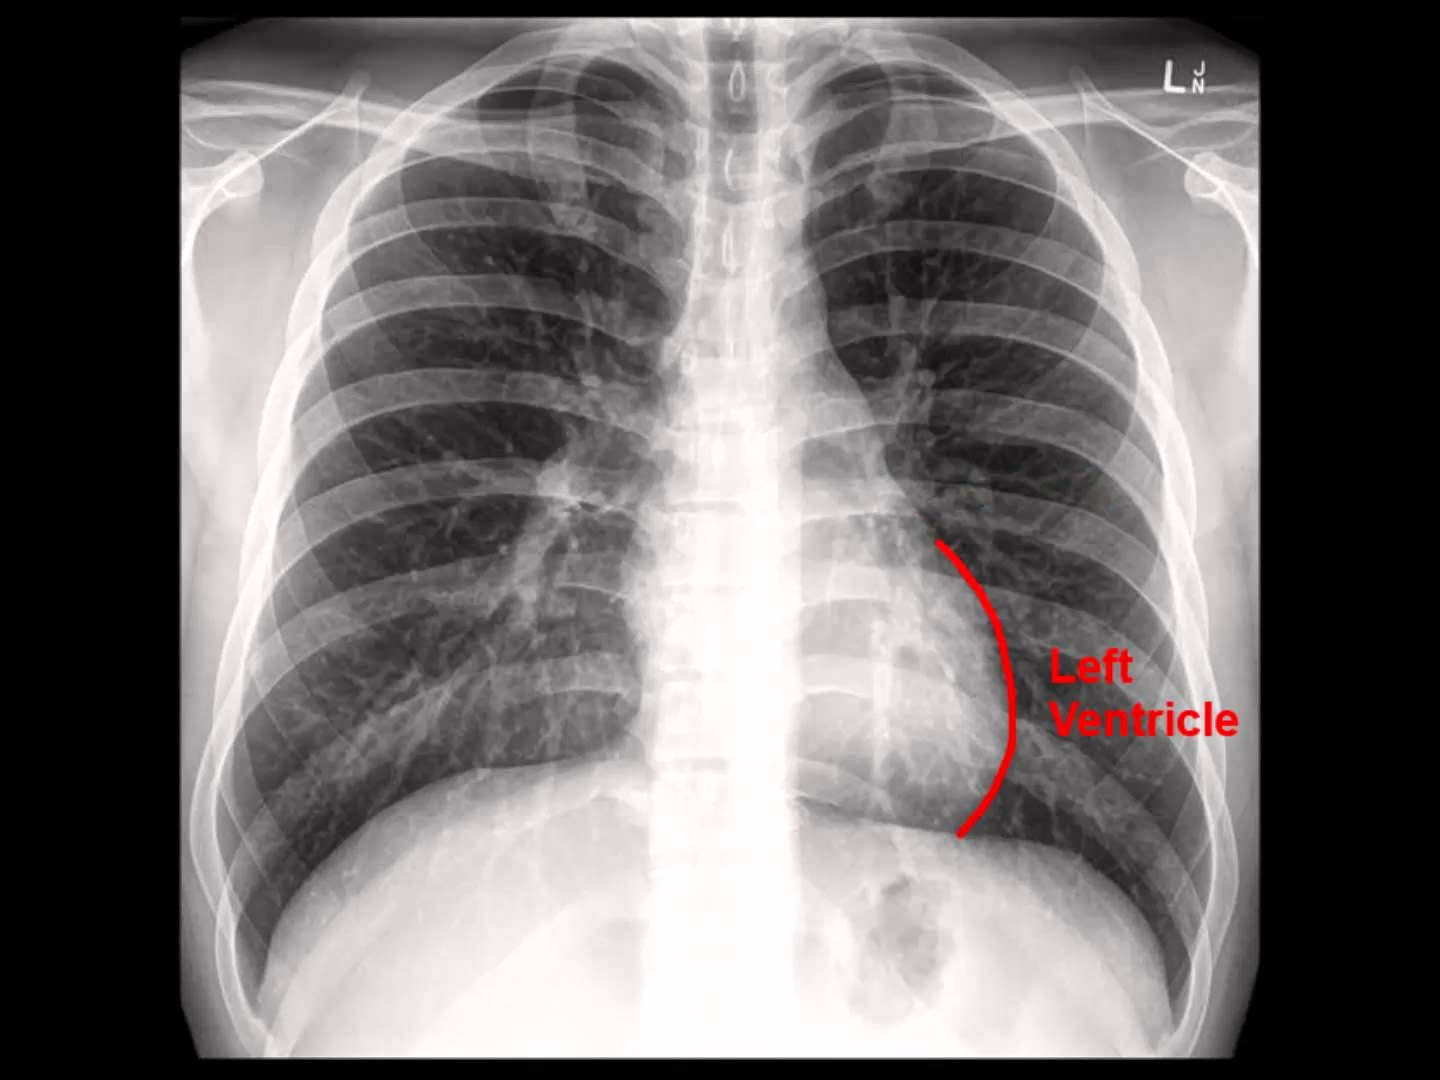 http://pathologyvideos.blogspot.ro/2014/04/chest-x-ray-analysis-in-nutshell.html